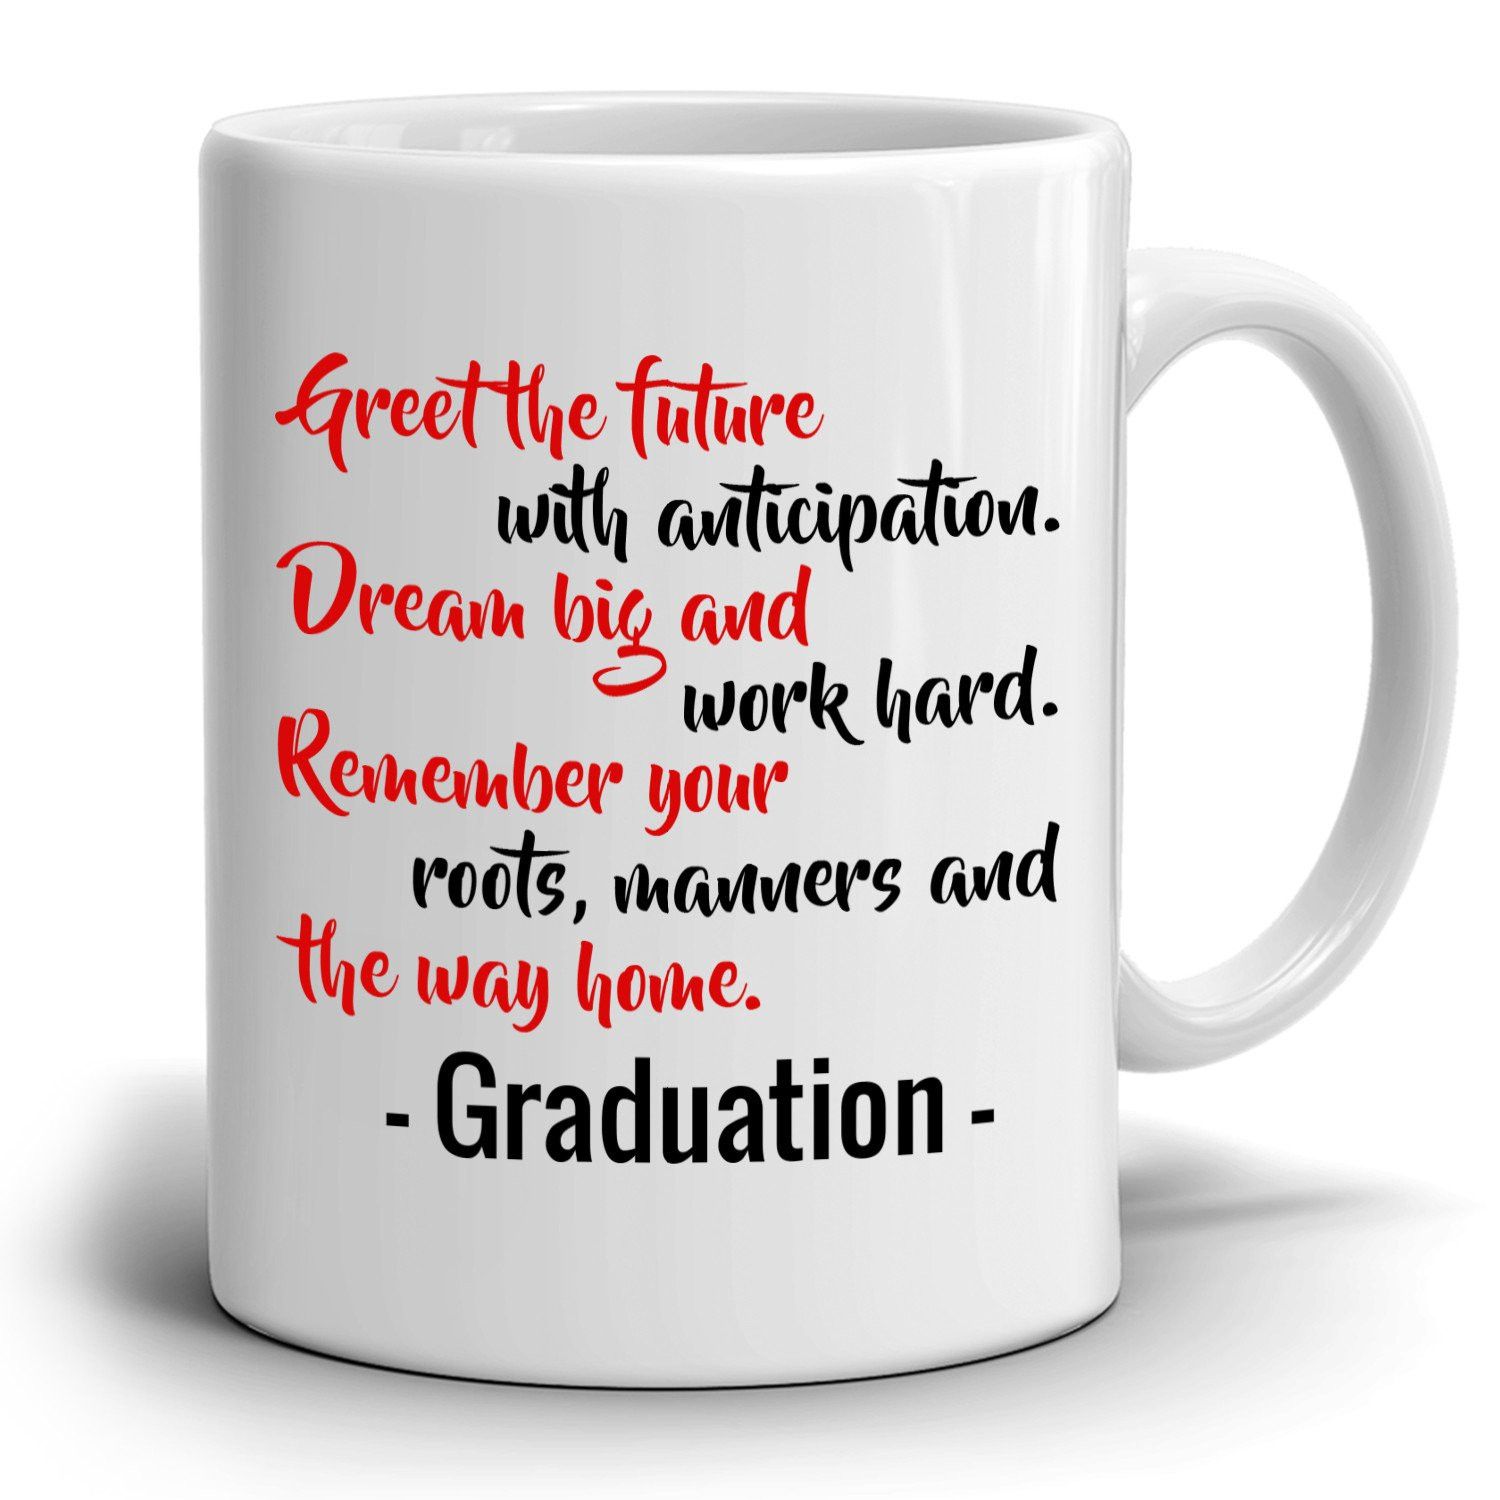 2017 Graduation Quotes
 Inspirational College Graduation Quotes Gift 2017 Coffee